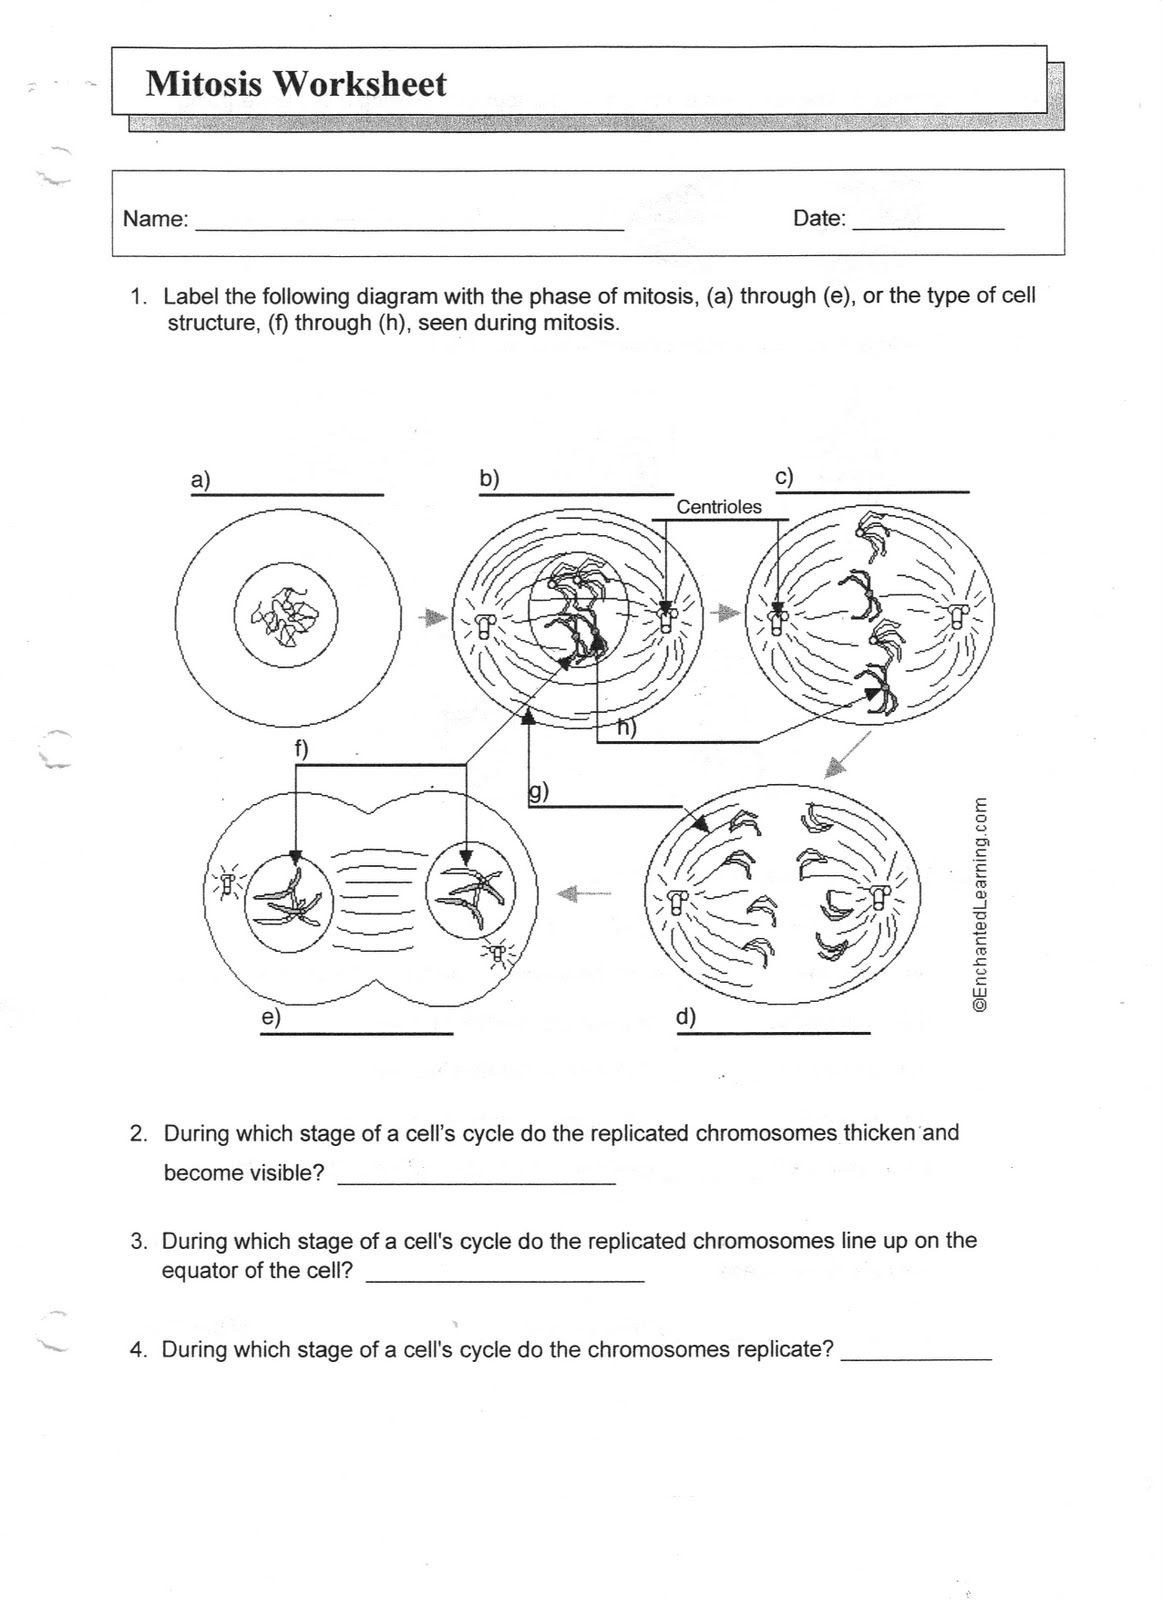 cell cycle and mitosis worksheet image result for mitosis worksheet of cell cycle and mitosis worksheet